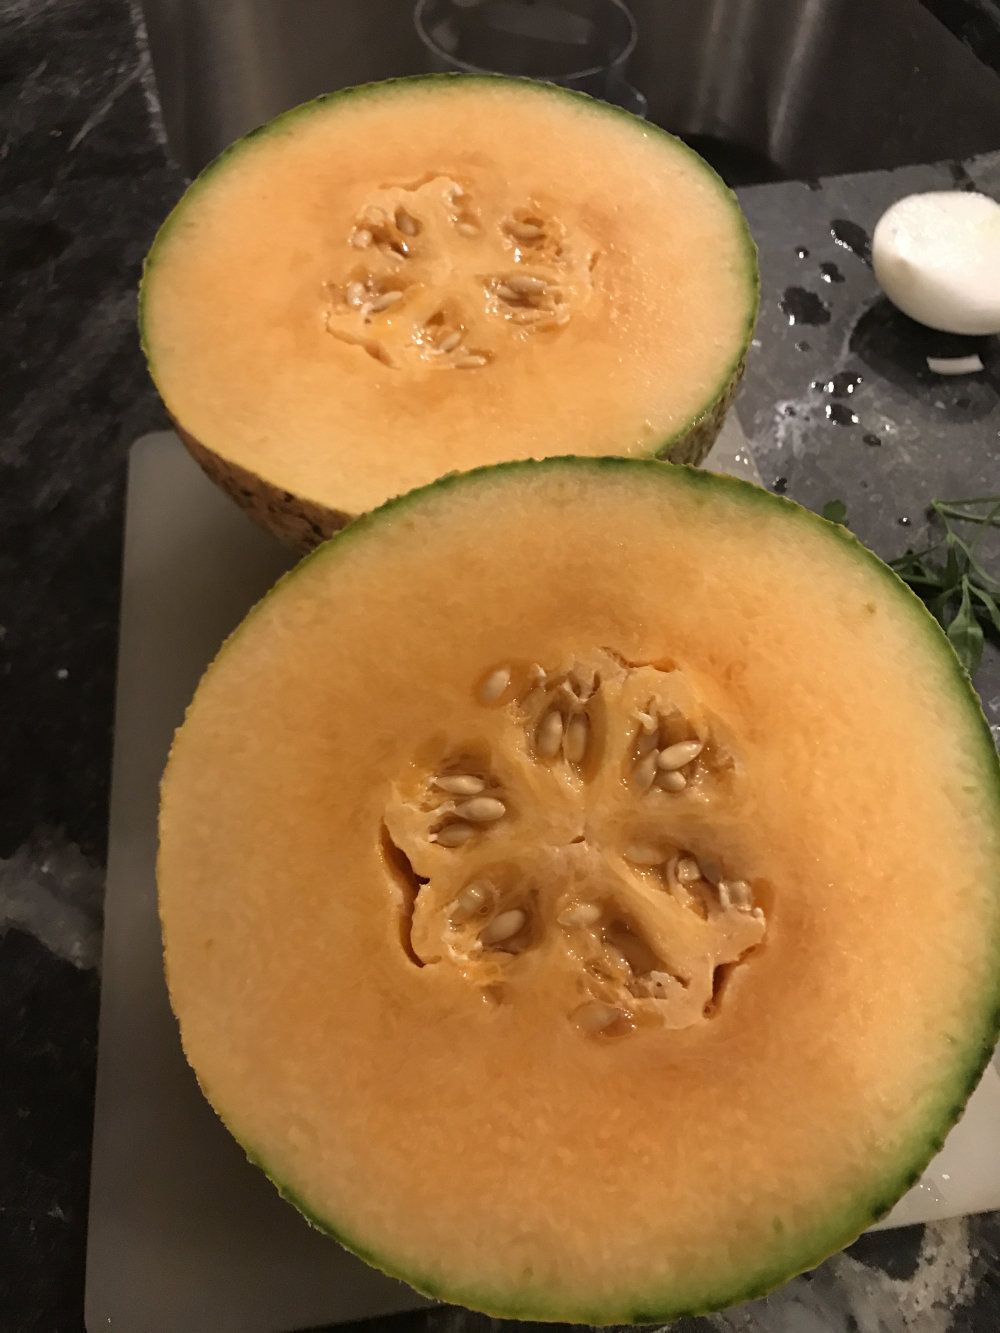 A home grown melon cut in half to see the beautiful orange interior.